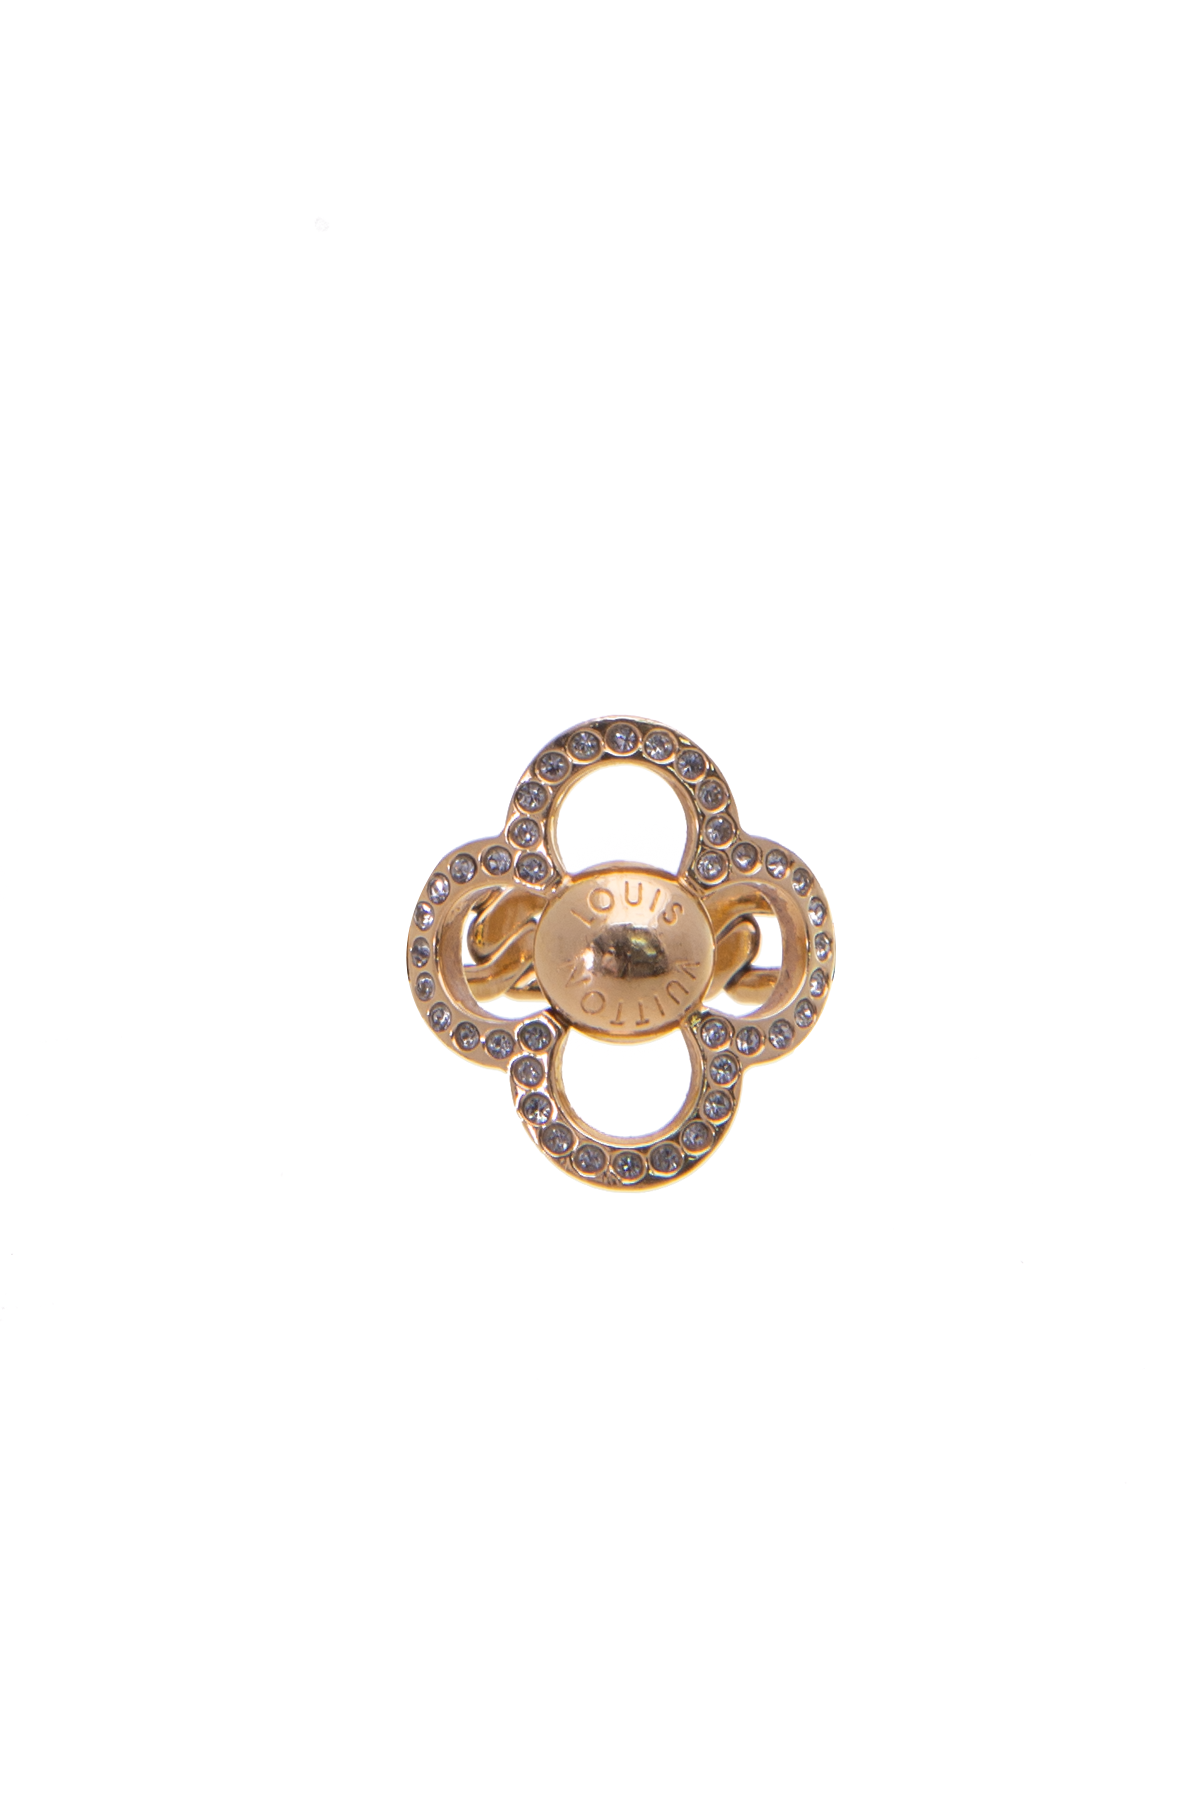 LV Crystal Gold Ring | Yaas Jewellery